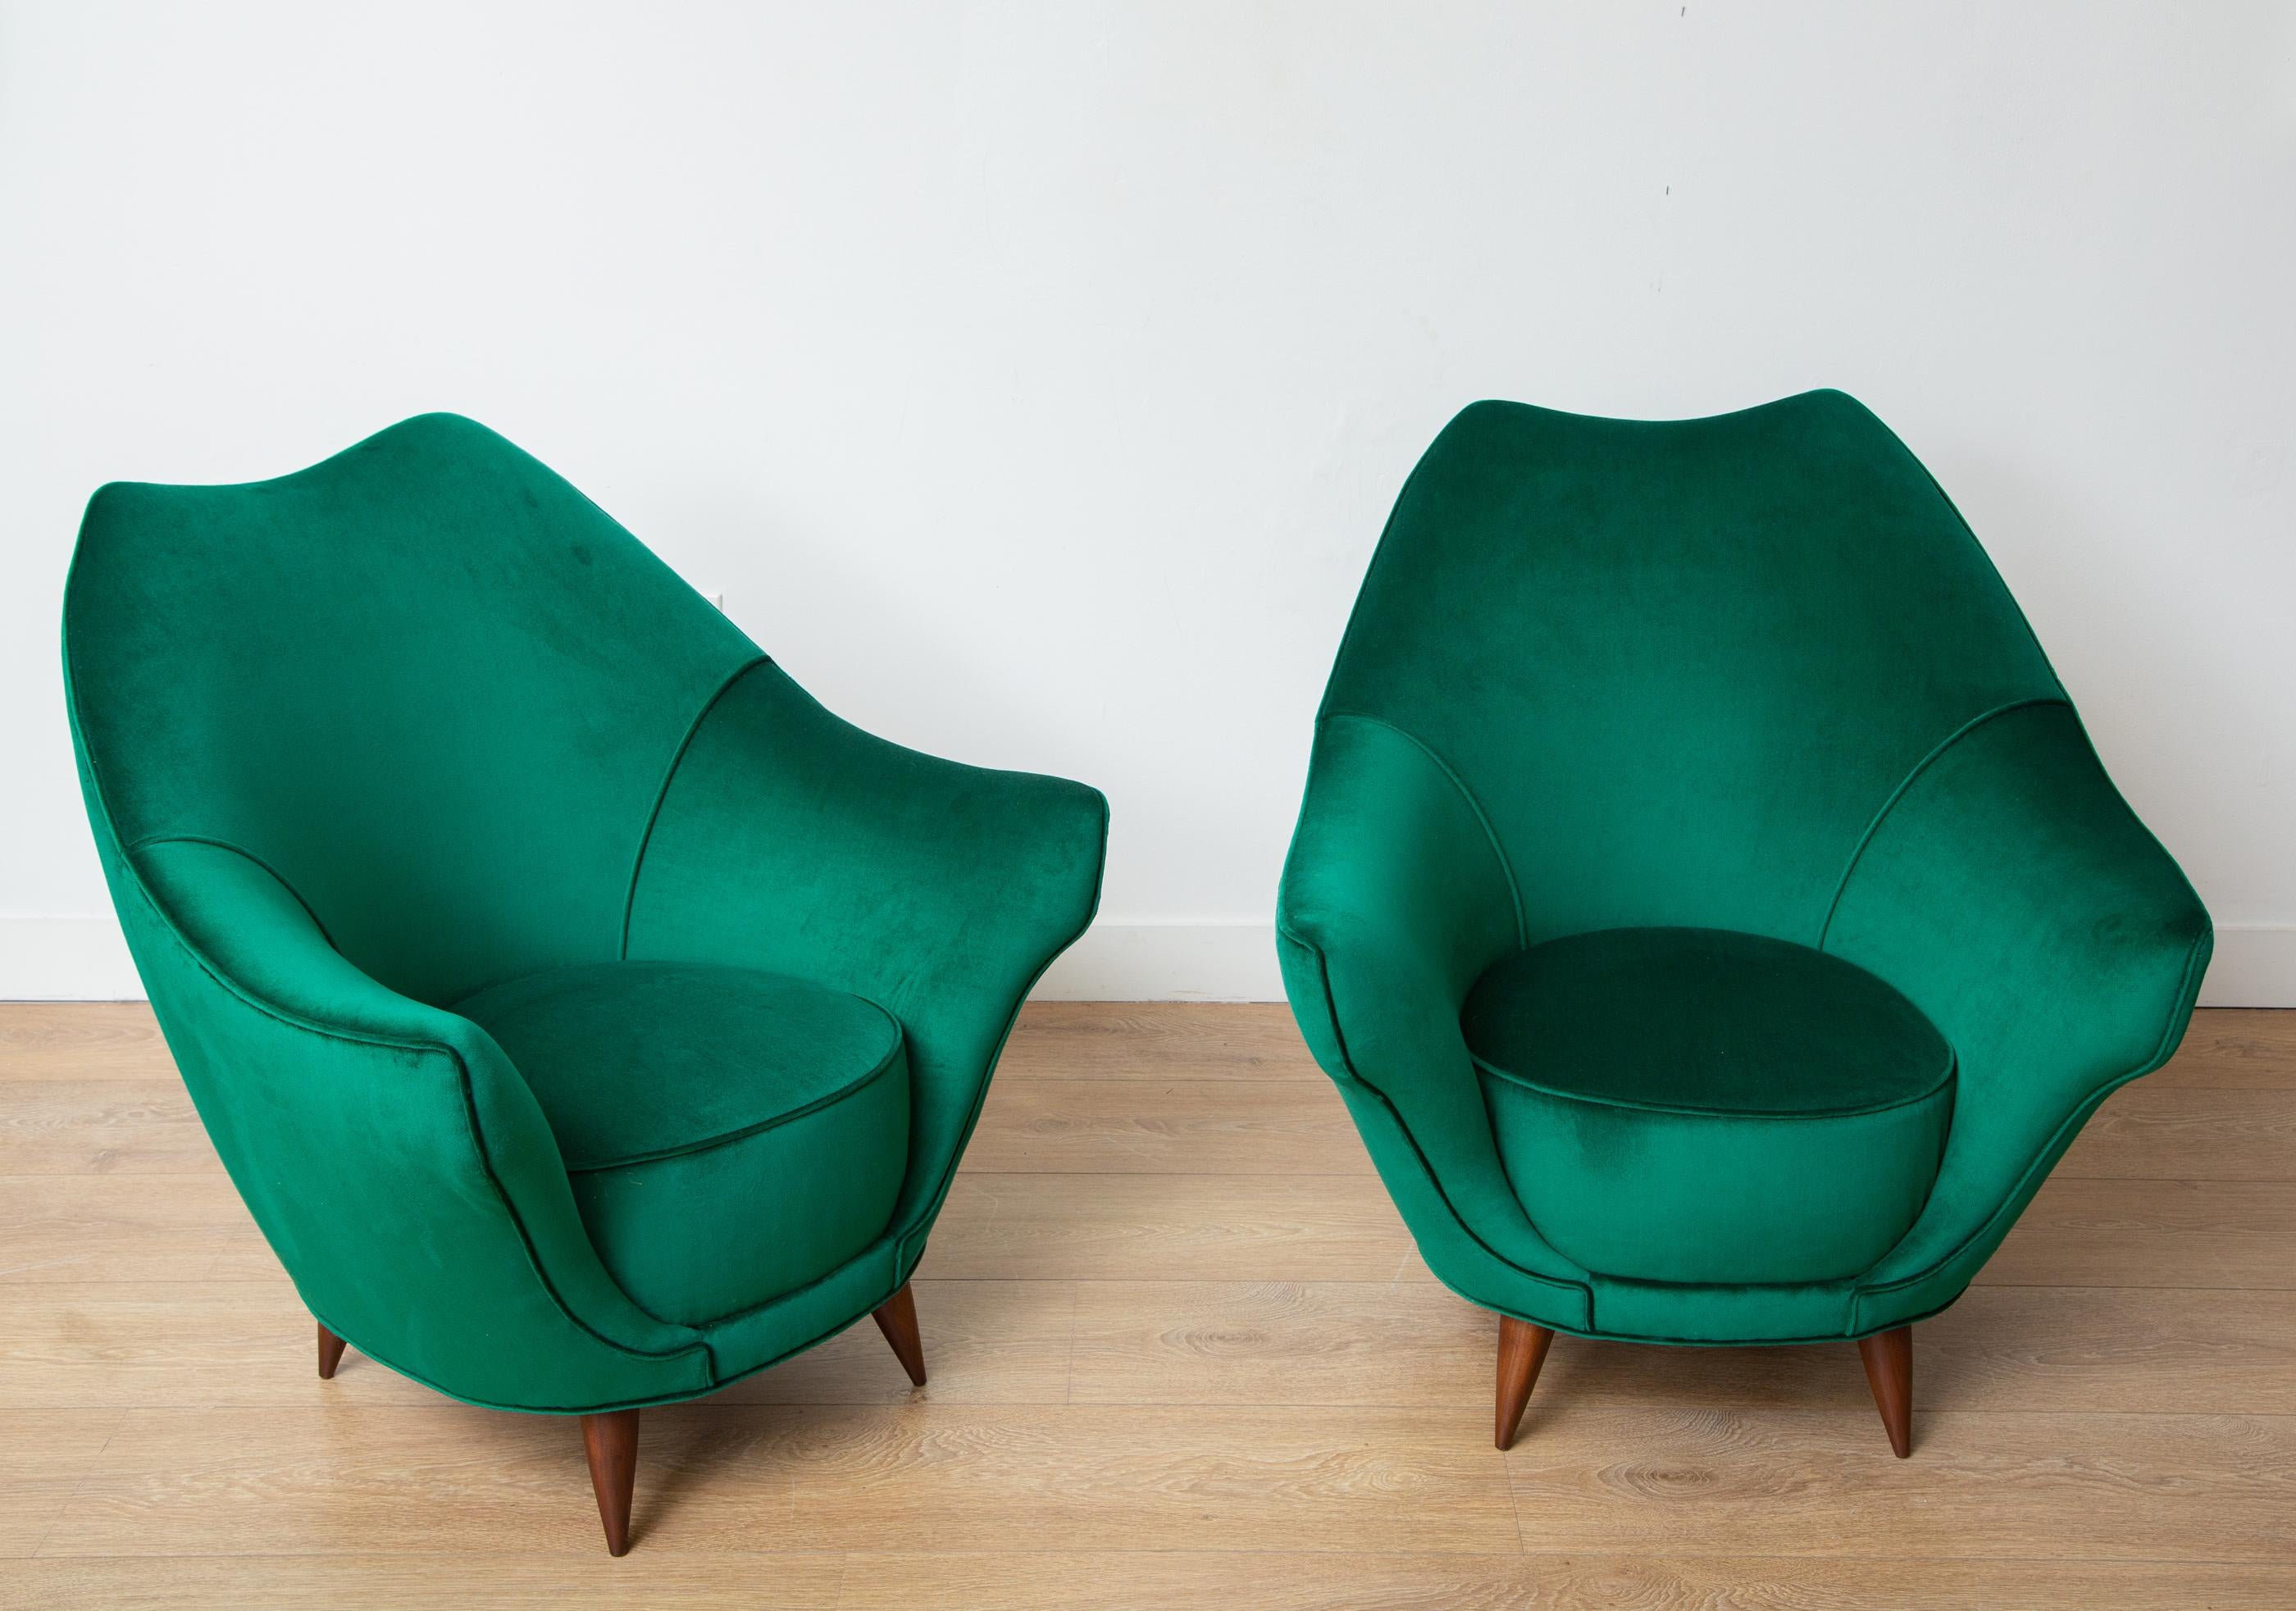 Pair of mid-century modern Italian lounge chairs in Emerald green velvet
Newly upholstered with an emerald green velvet 
Walnut finish conical wooden legs.
 Italy, circa 1950. 
Restored to perfection by our local artisans.
Located in our store in